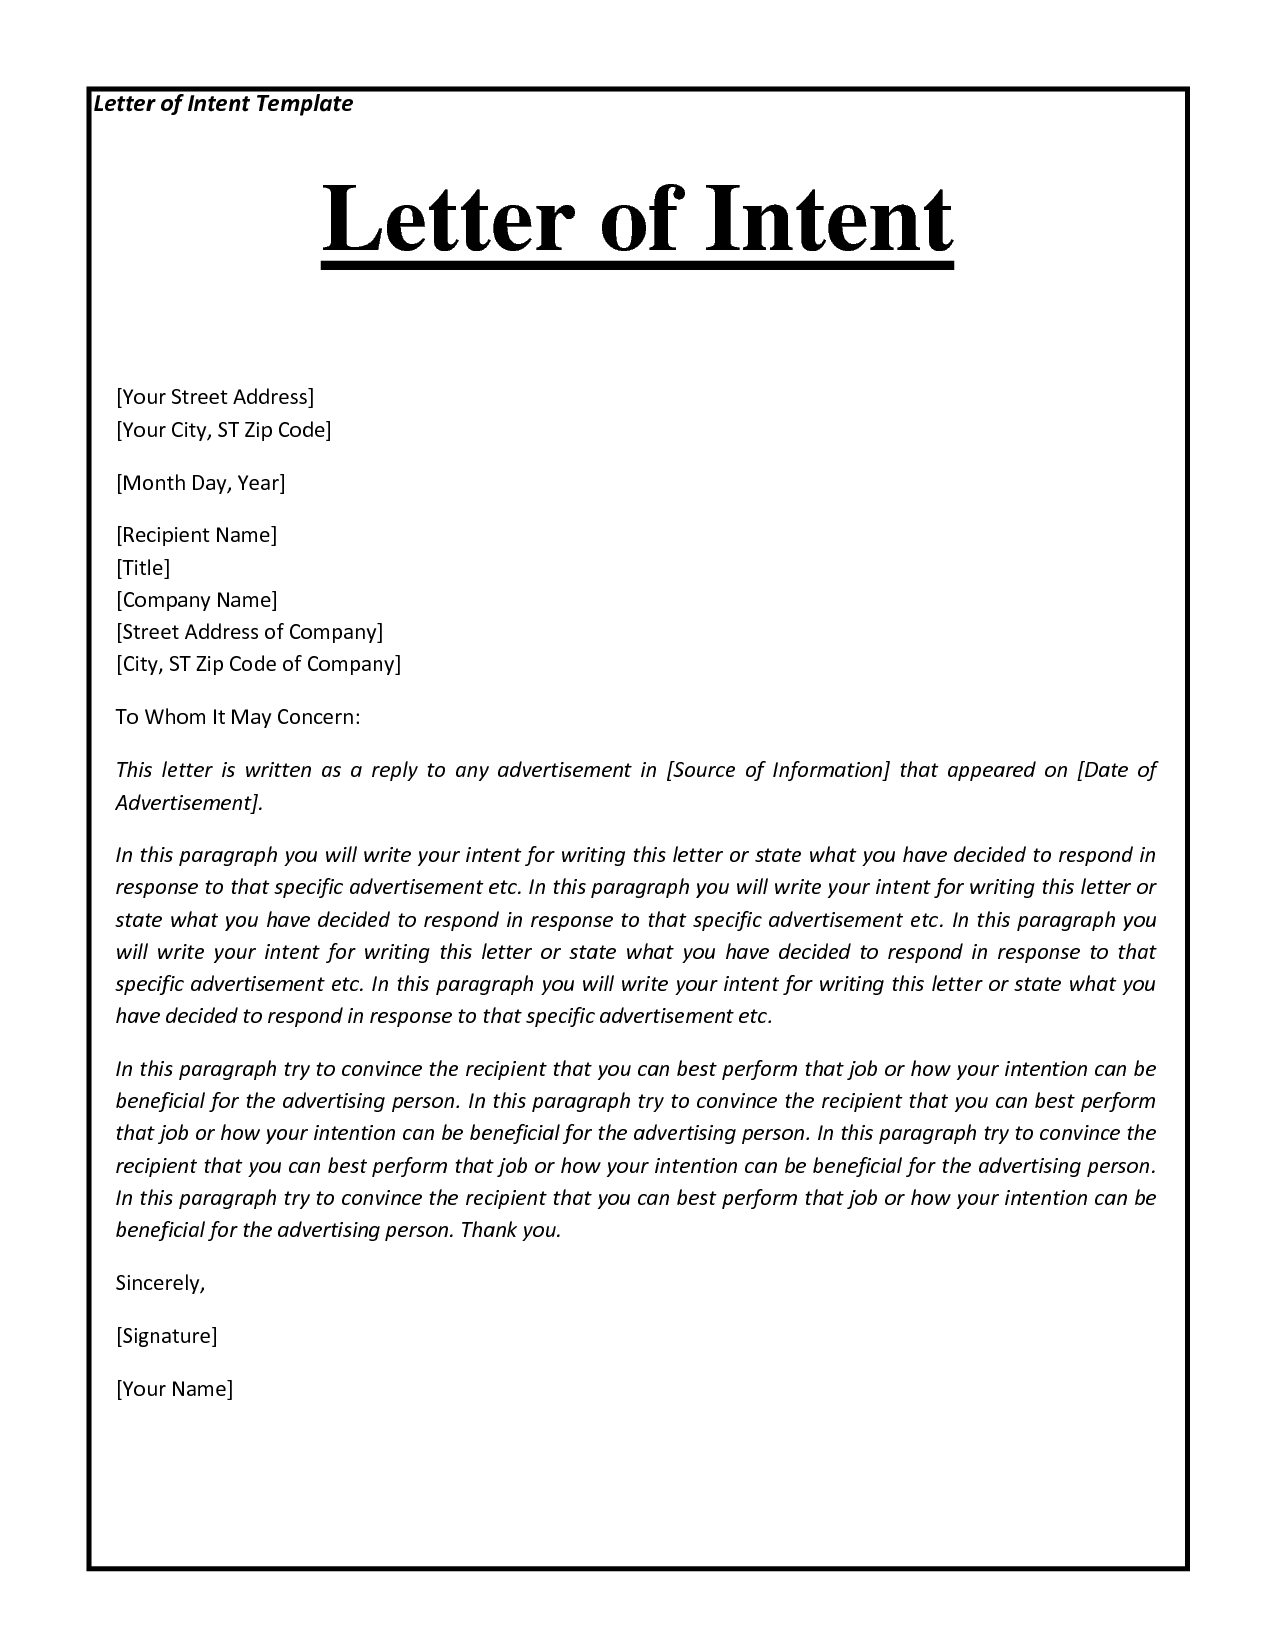 Letter Of Intent Format For Business Proposal Inspirational 